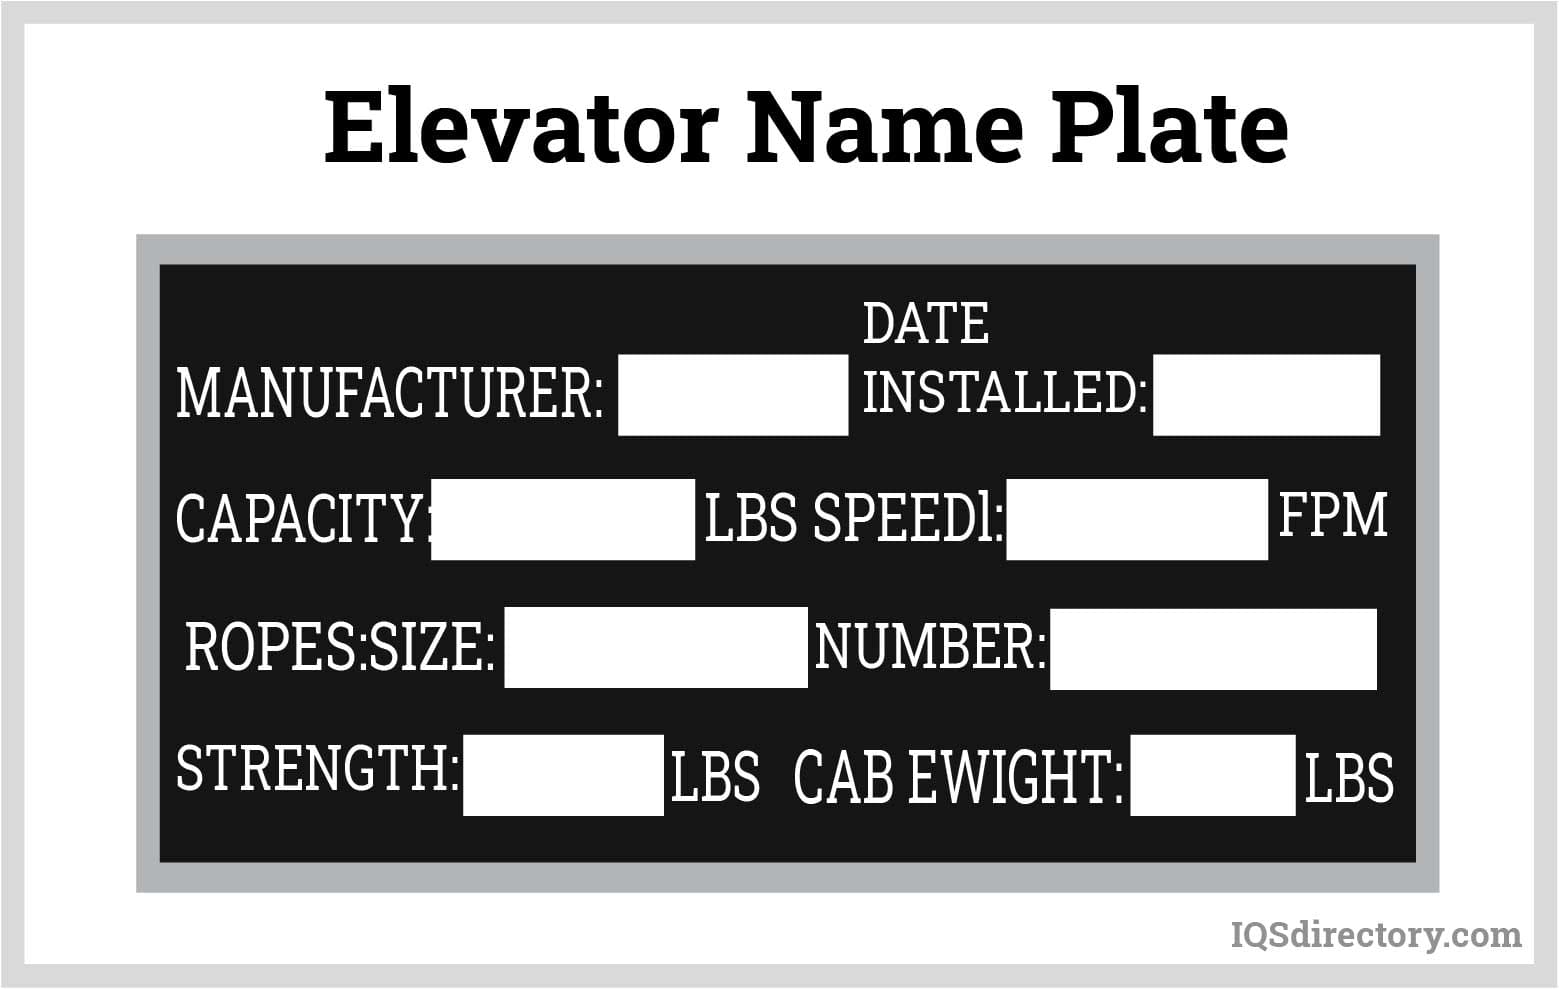 Engraving & Identification Plates - Airline Suppliers